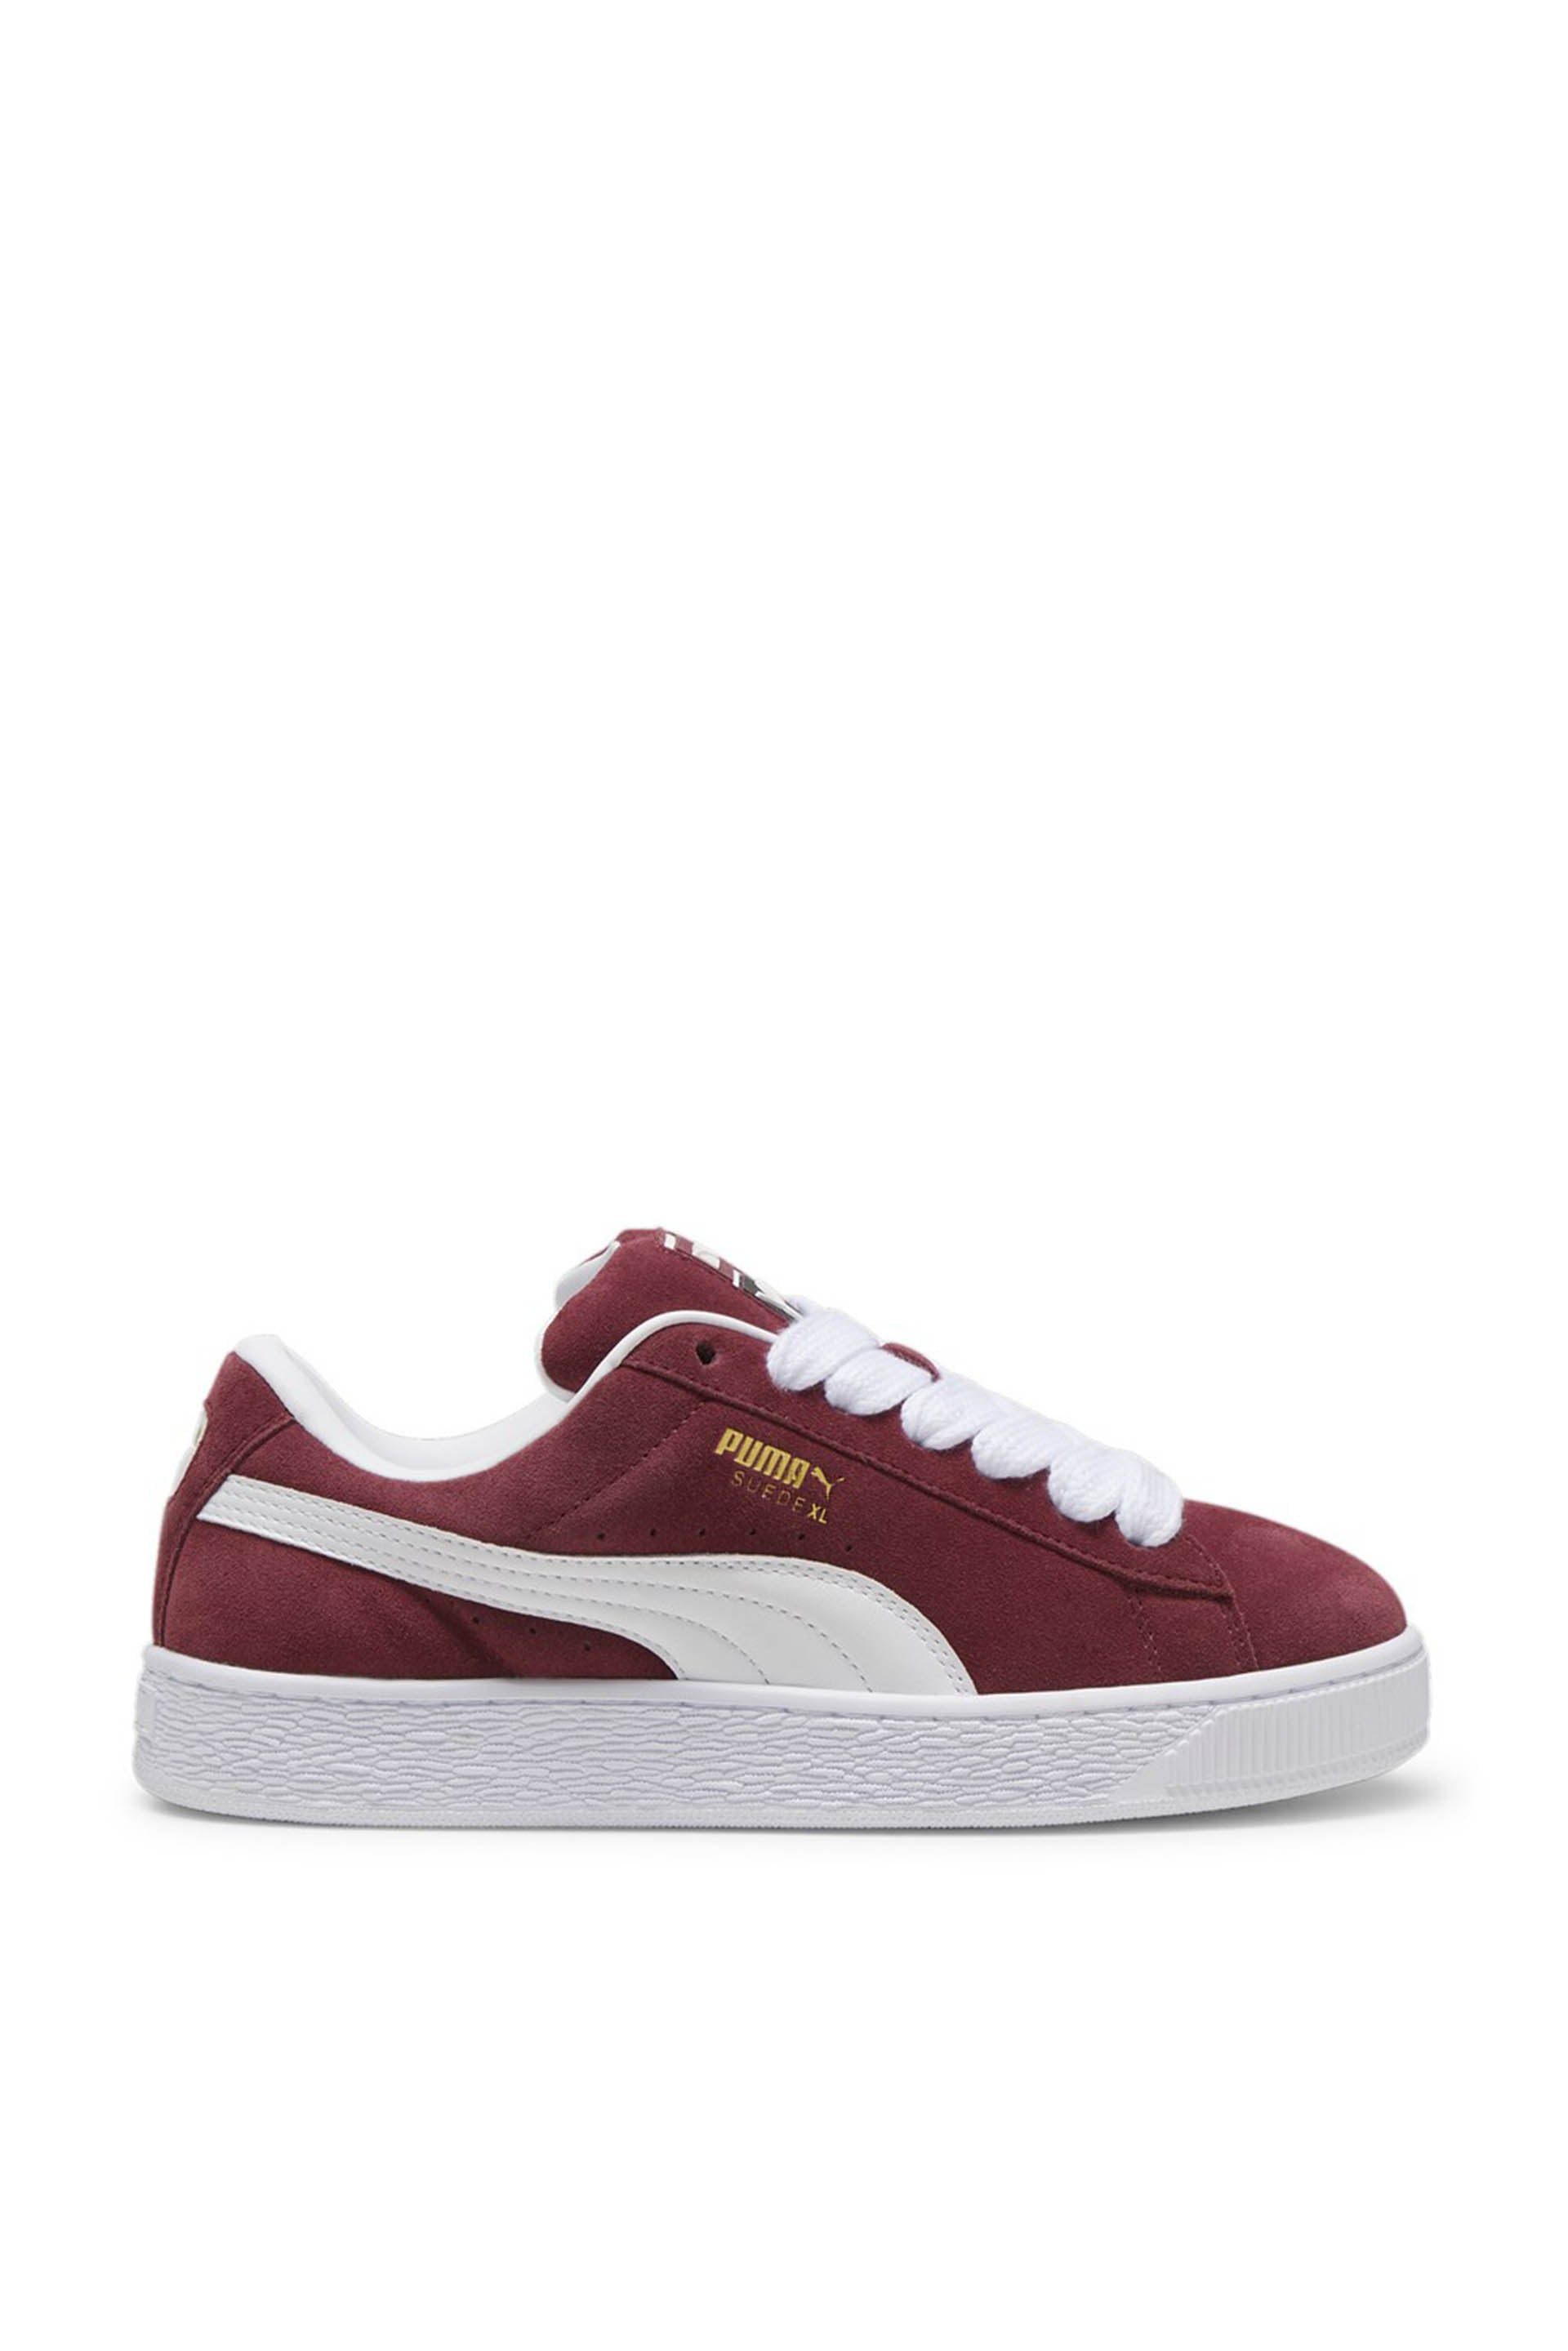 SNEAKERS Rosso Puma